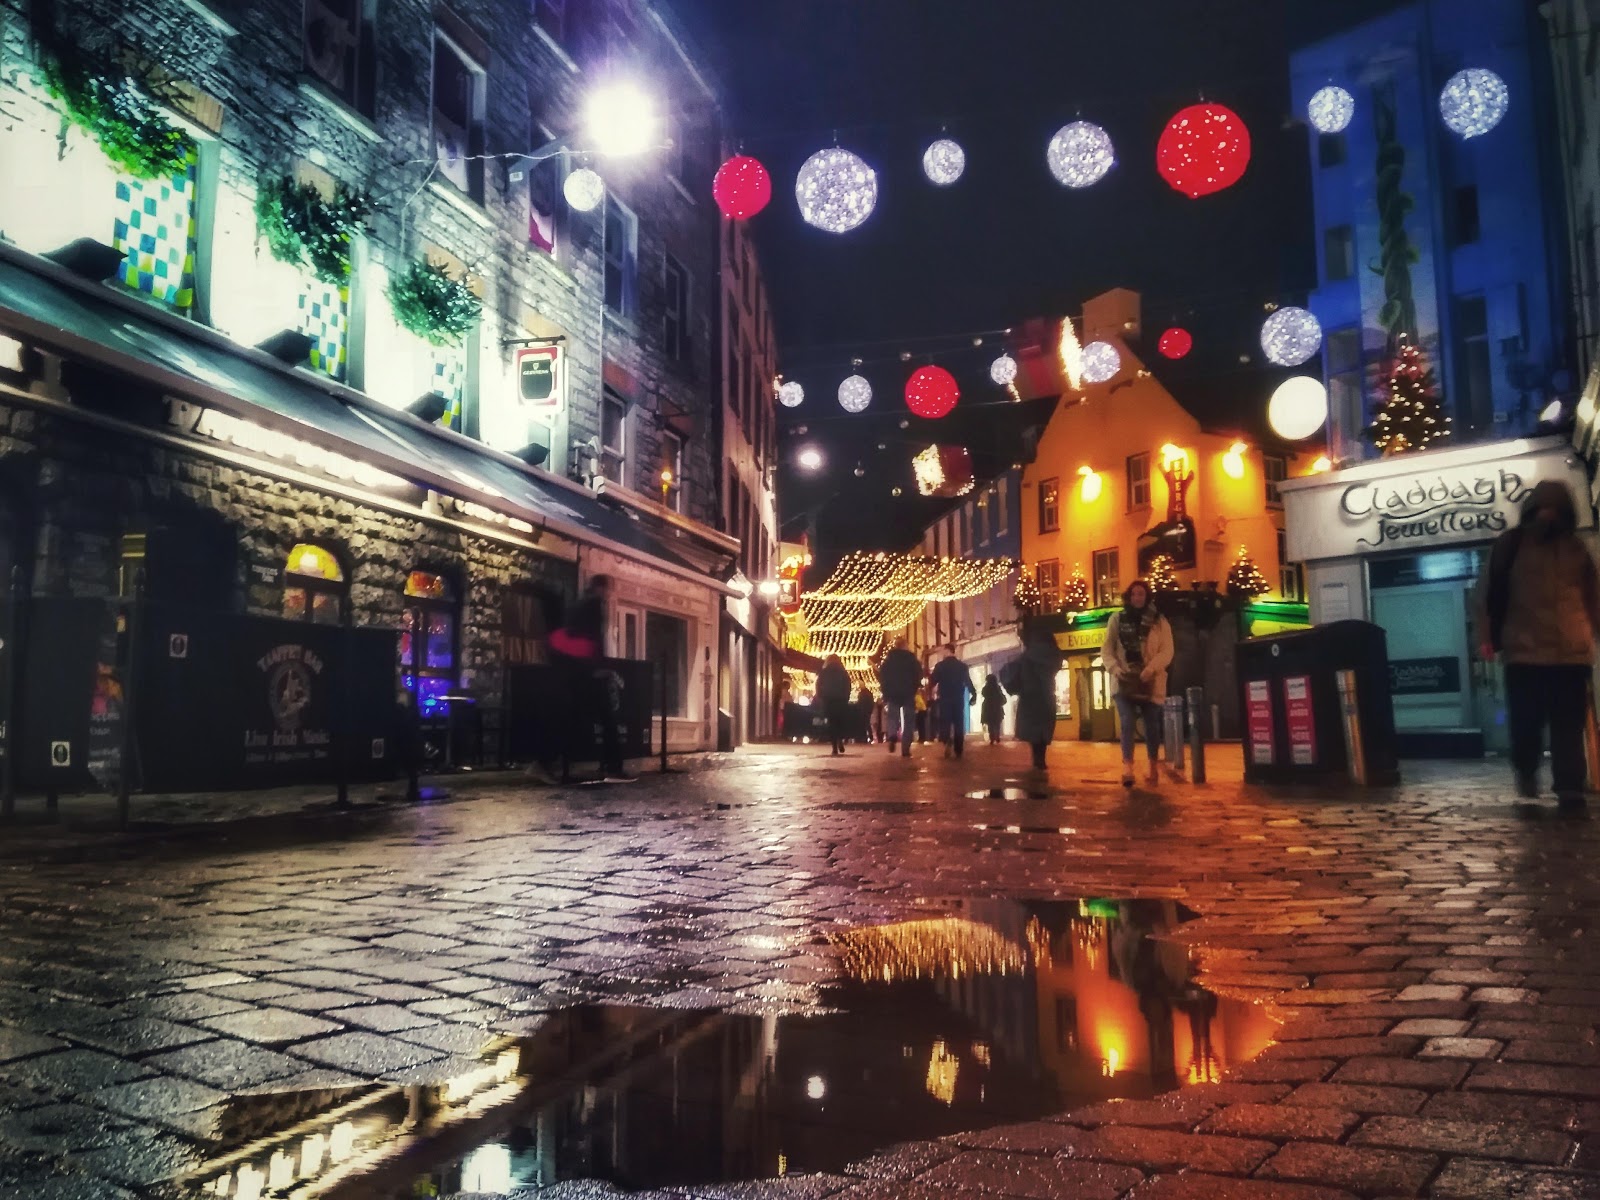 POSTCARDS FROM IRELAND: Galway photo walk in the dark at Christmas